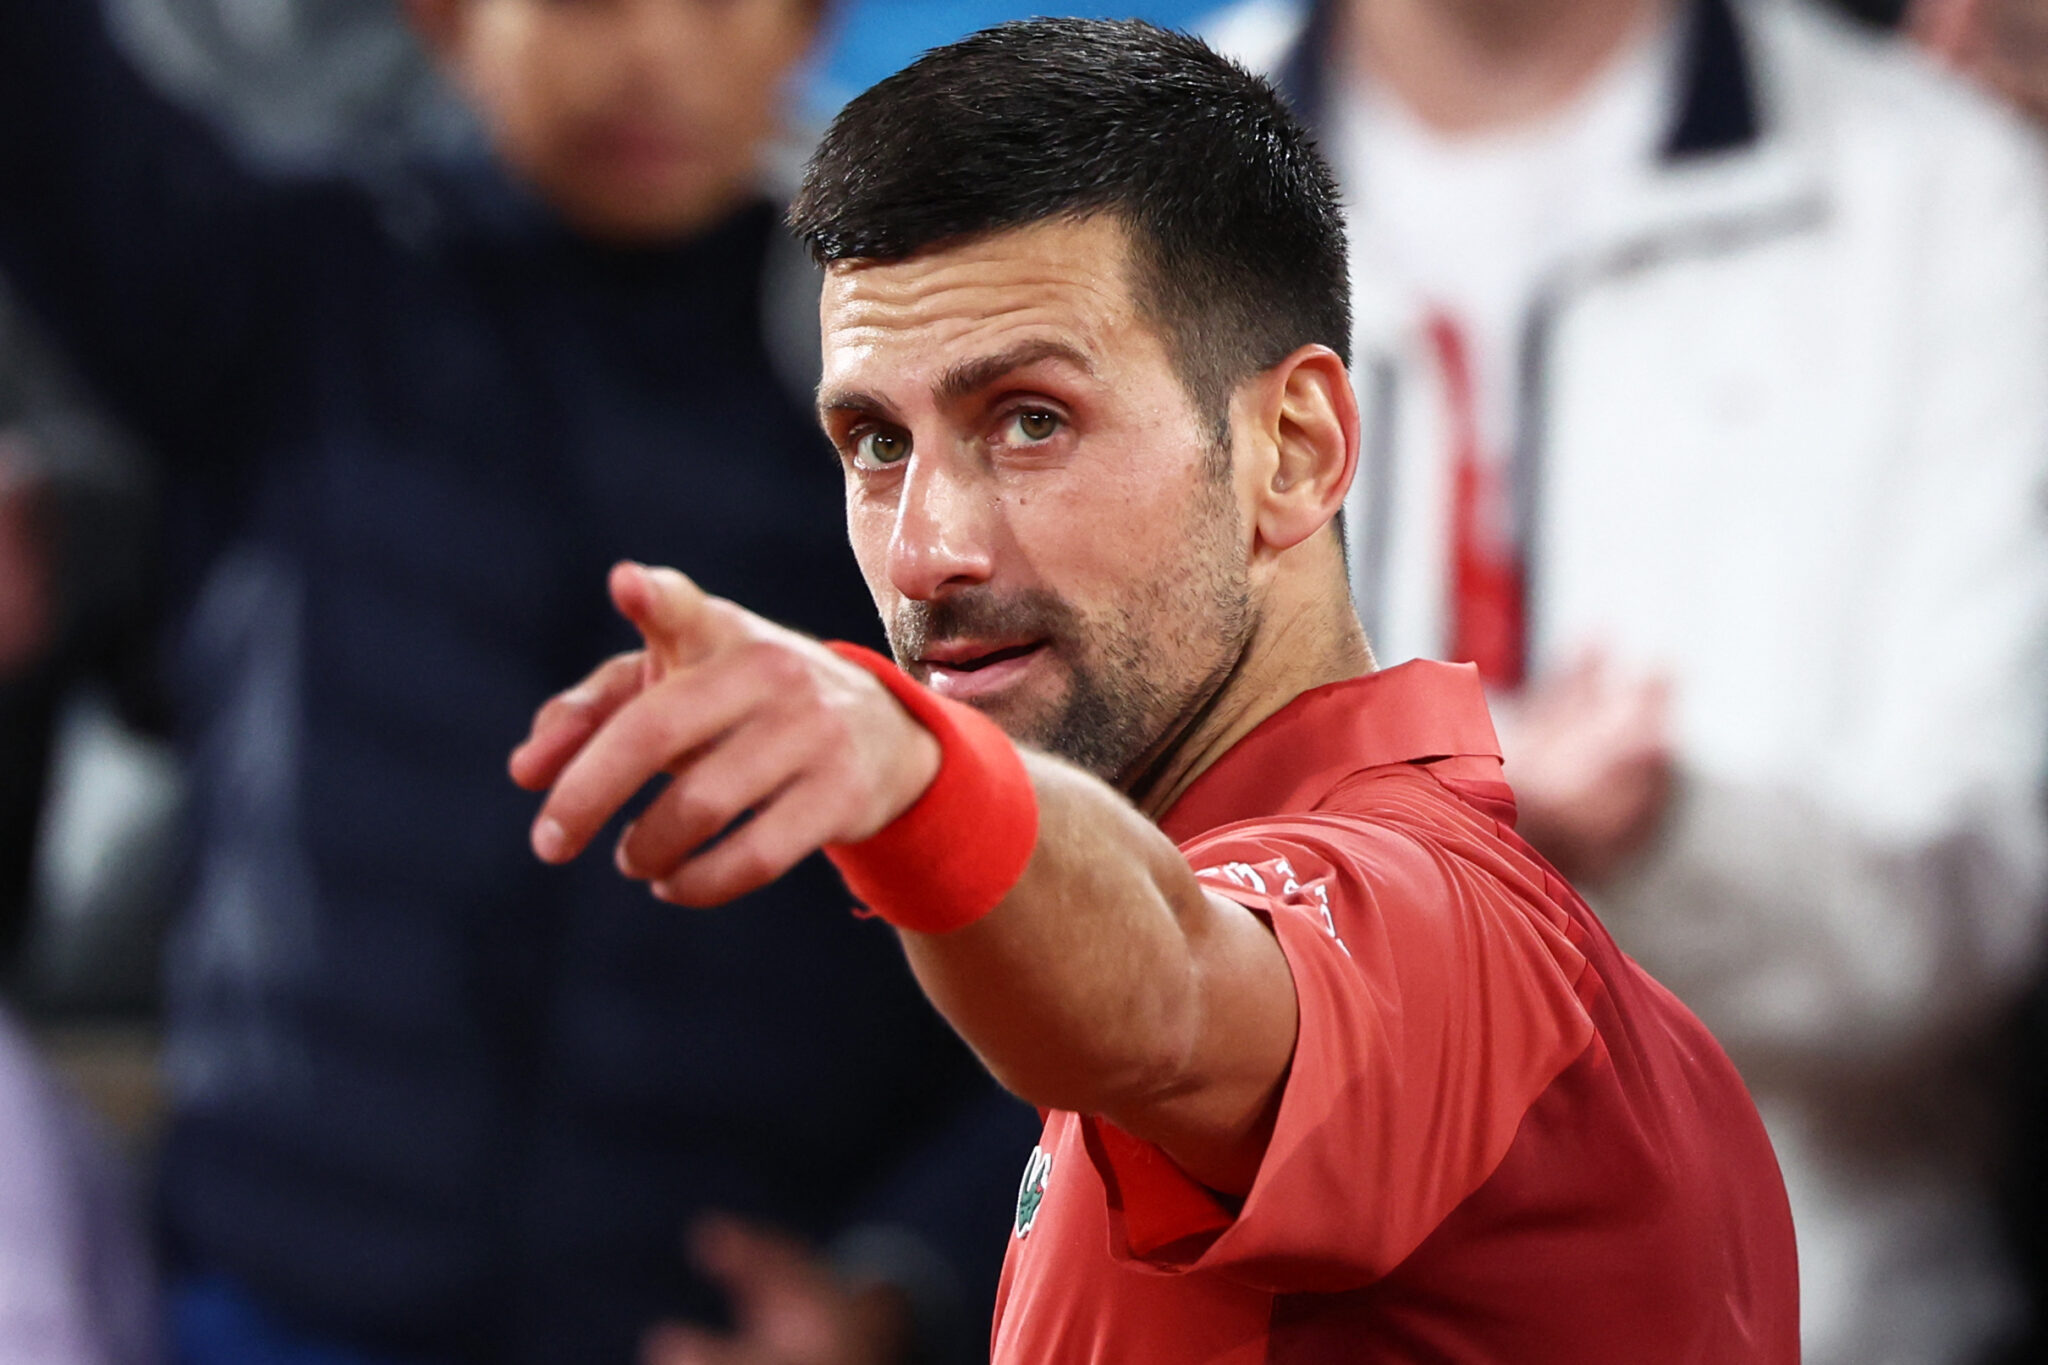 Djokovic says ‘things could be handled differently’ after 3 am finish